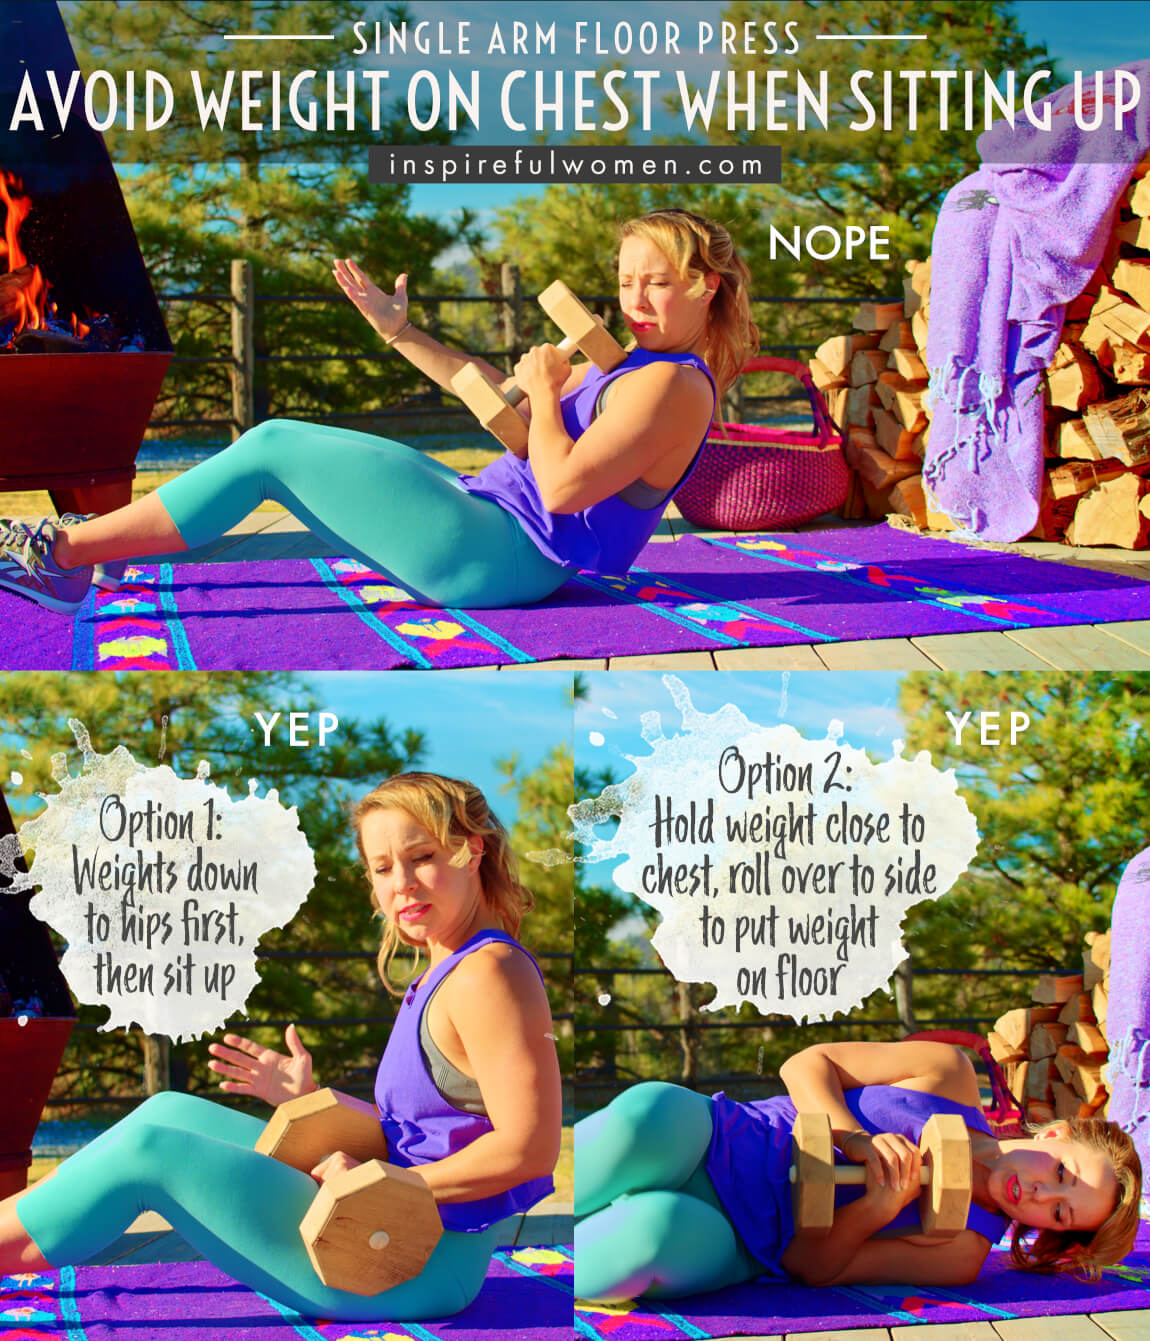 avoid-weight-on-chest-when-sitting-up-single-arm-dumbbell-floor-press-proper-form